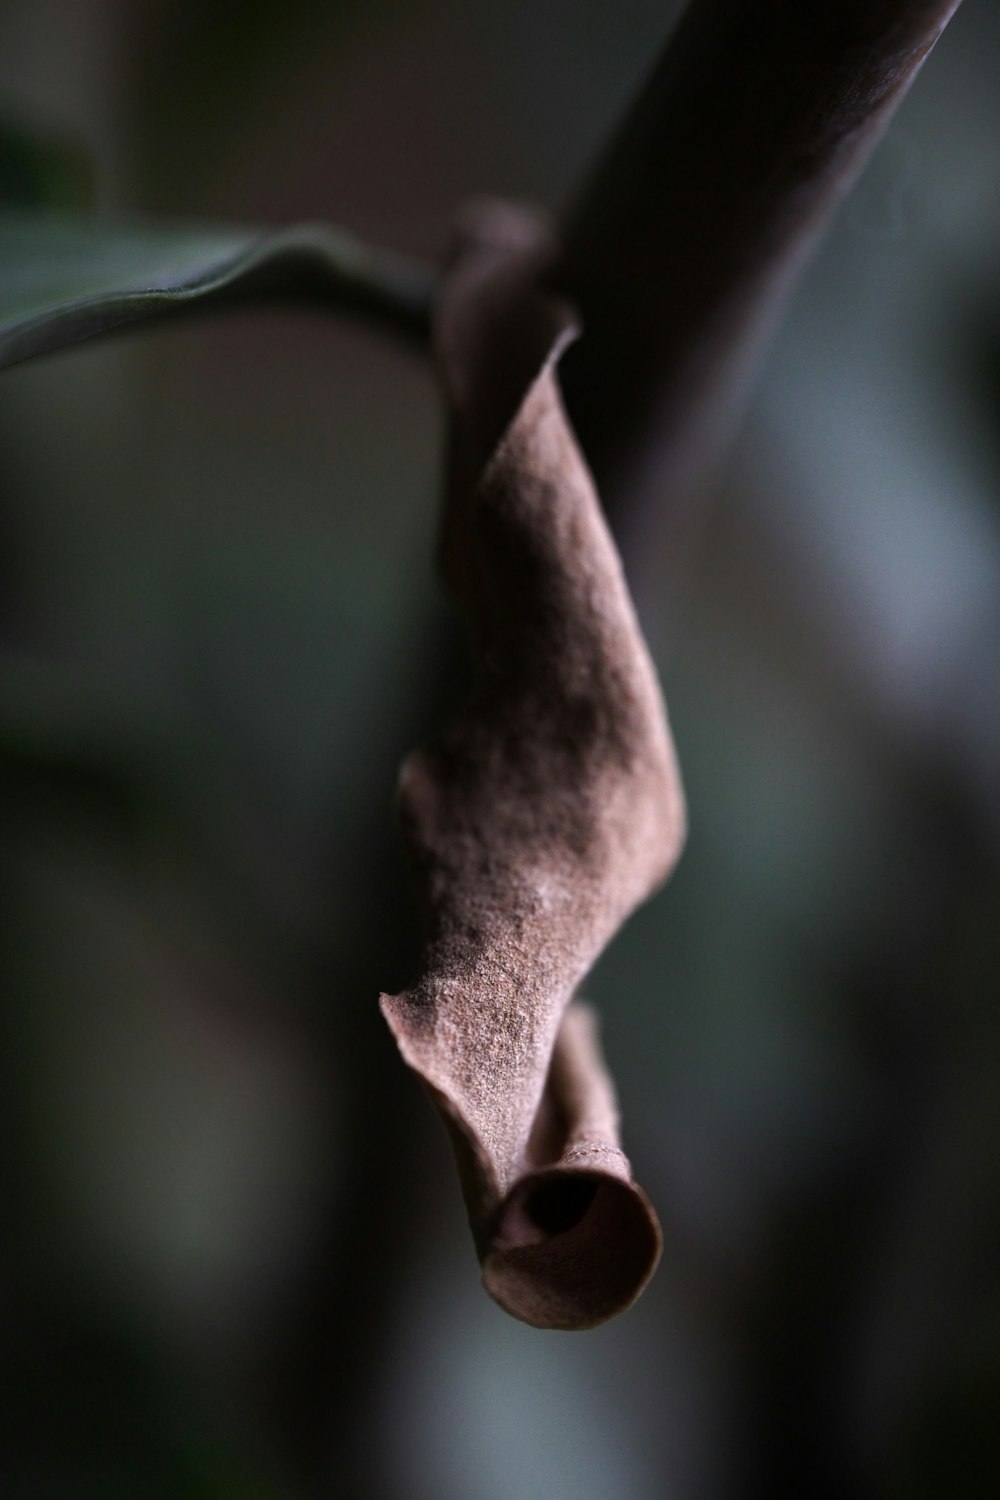 a close up of a plant with a long stem